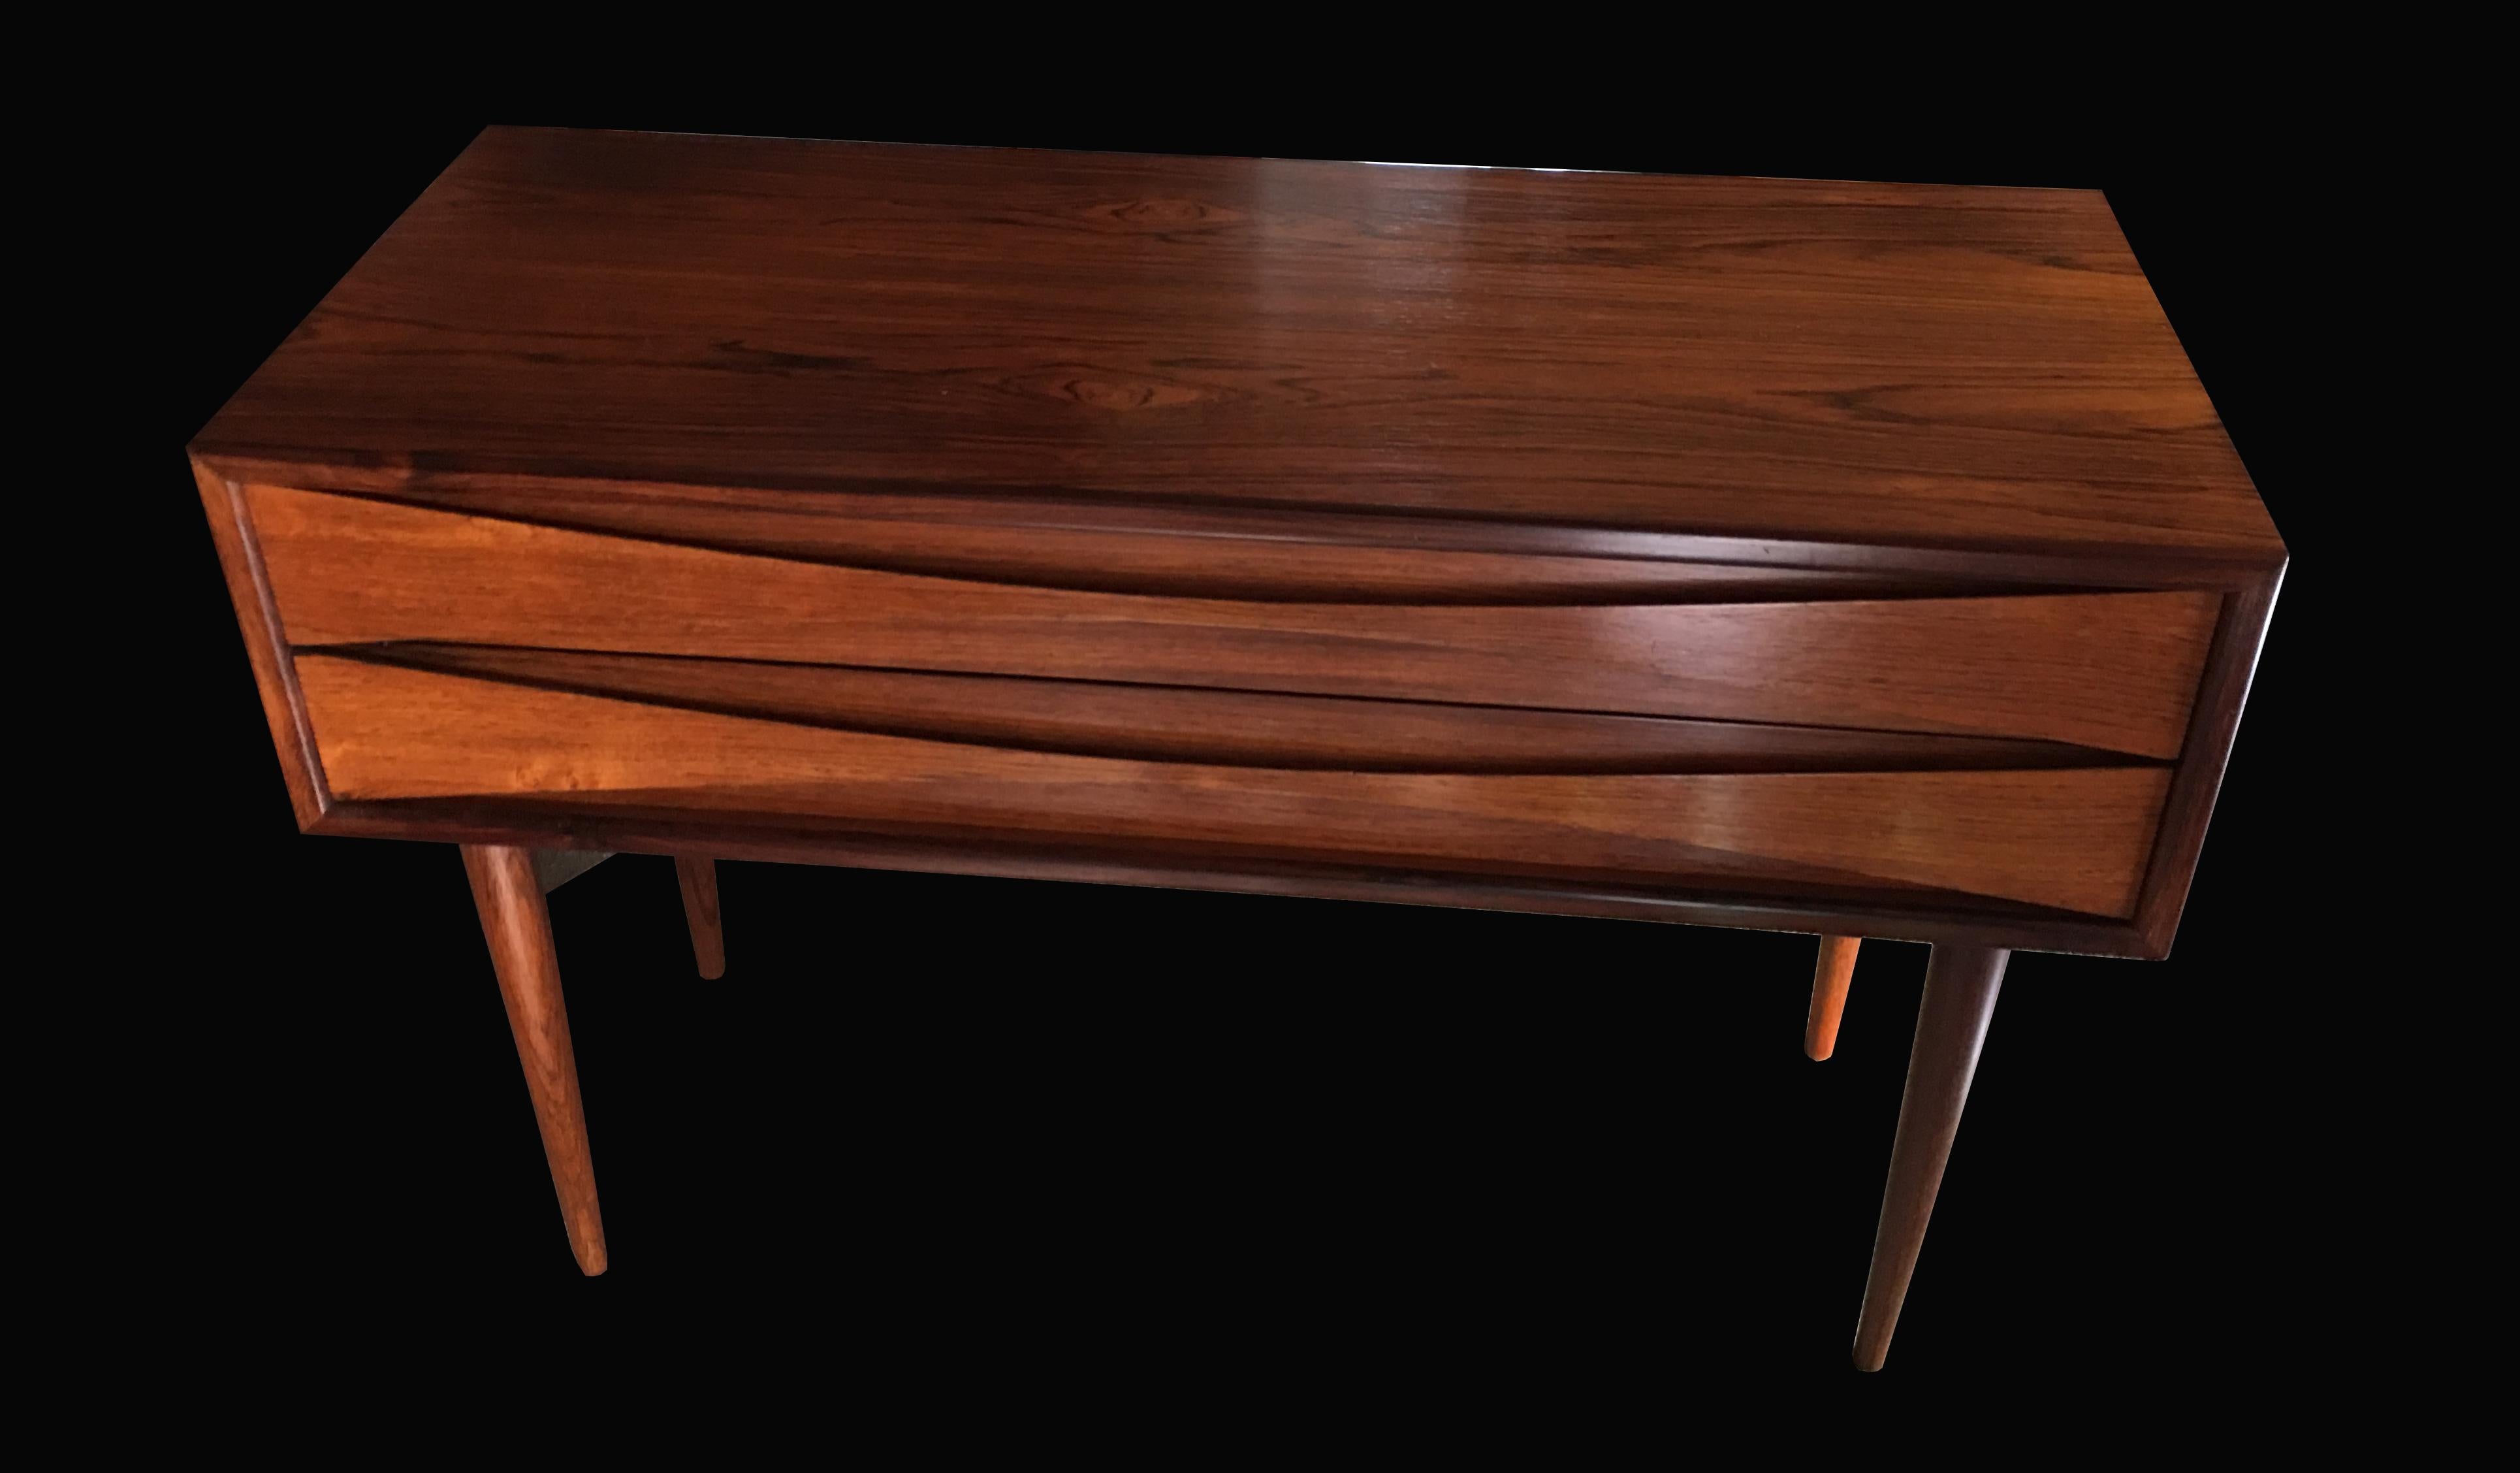 A very nice example of this highly sought after Mid-Century Modern low chest or side table, in nicely grained rosewood, by Arne Vodder for N.C Mobler in Denmark.